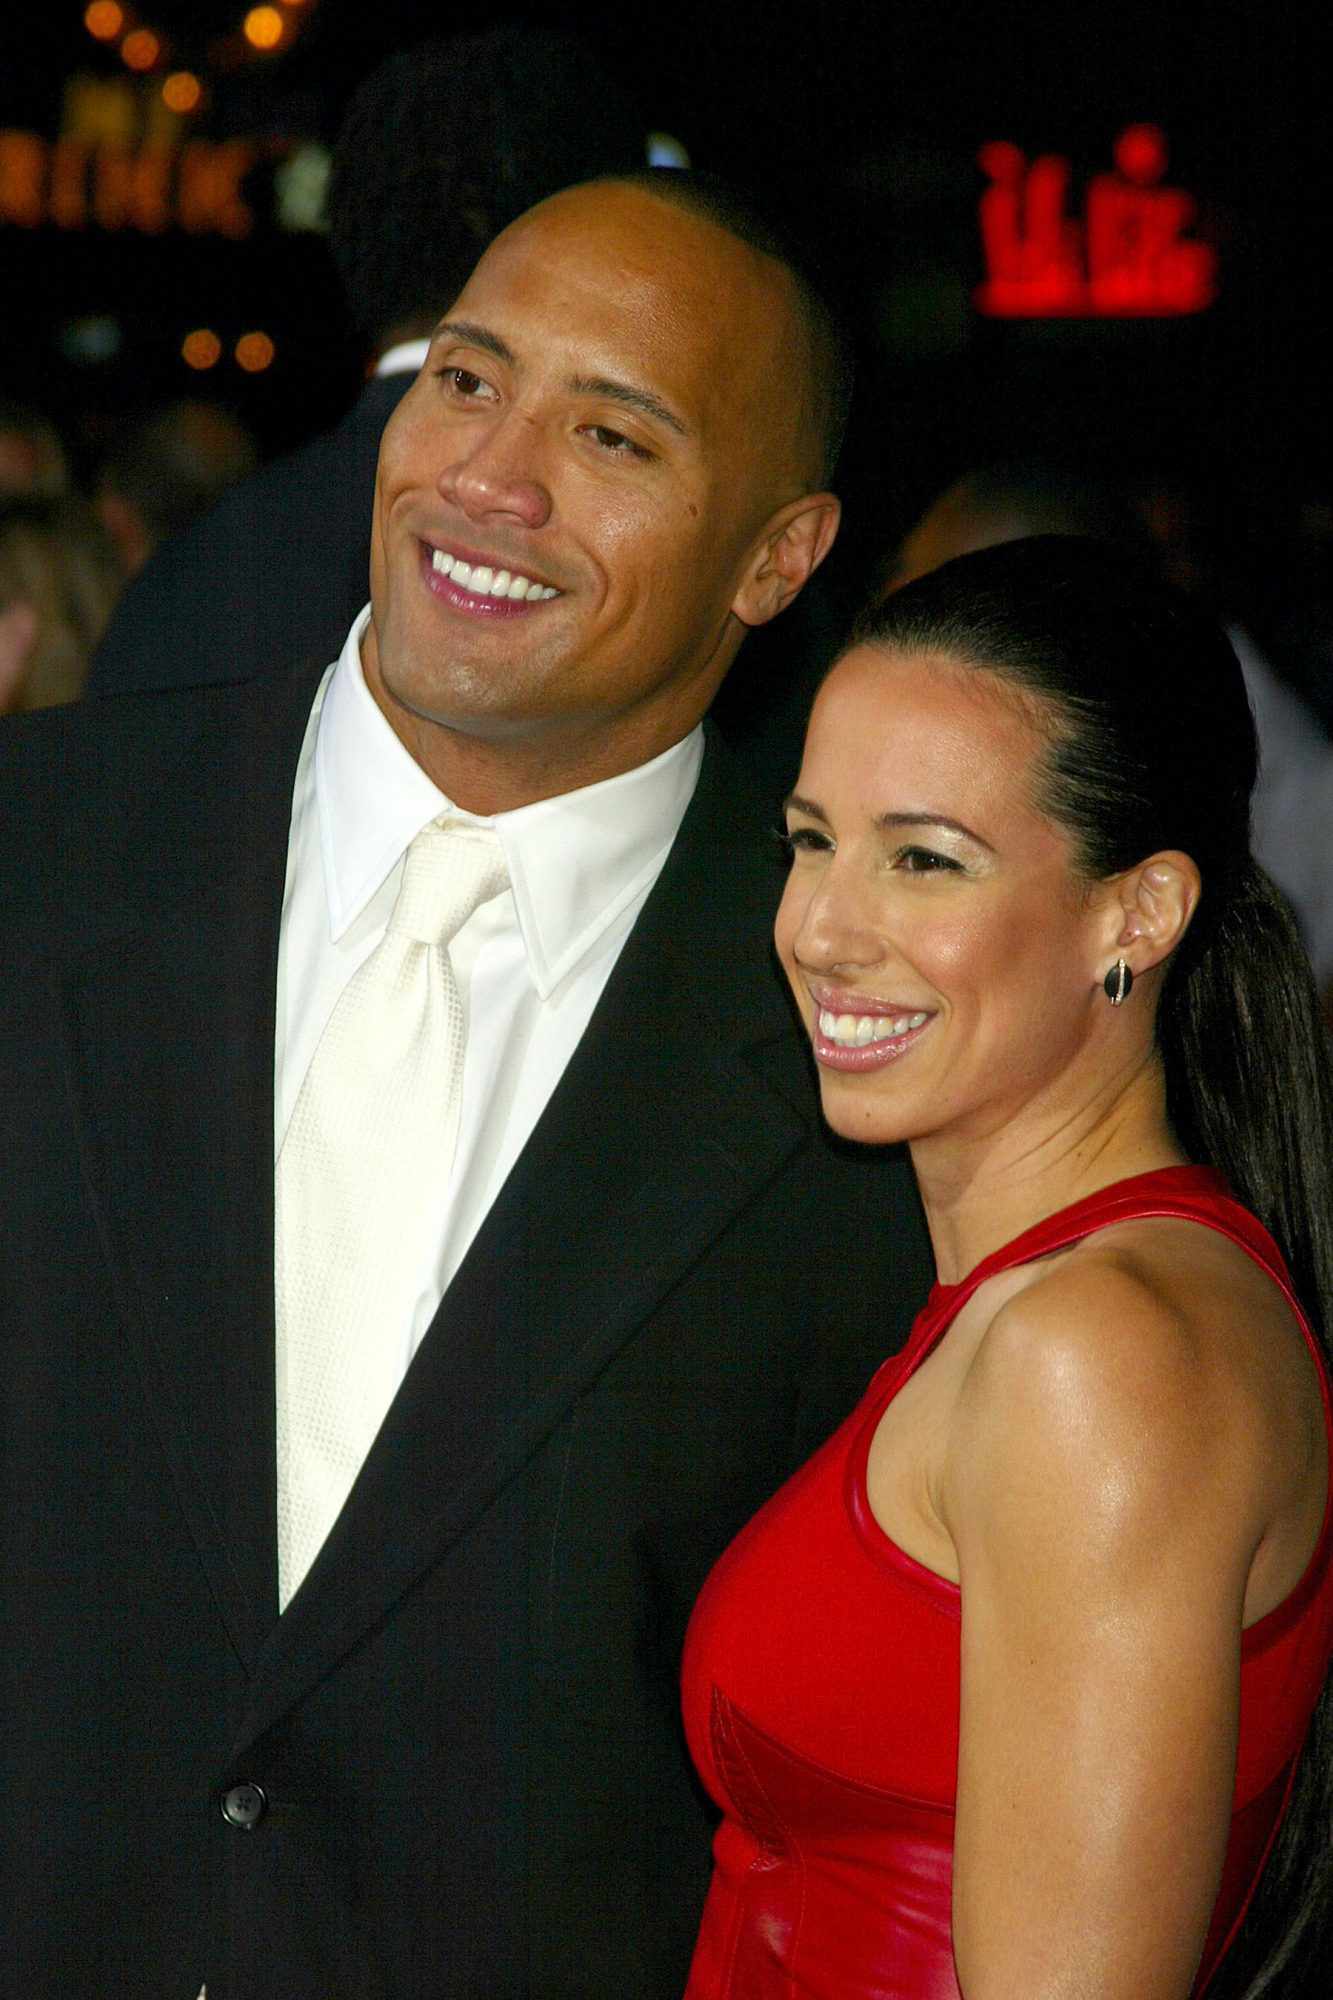 Dwayne 'The Rock' Johnson With Dany Garcia at the World Premiere Of The Rundown&nbsp;on Sept. 22, 2003&nbsp;